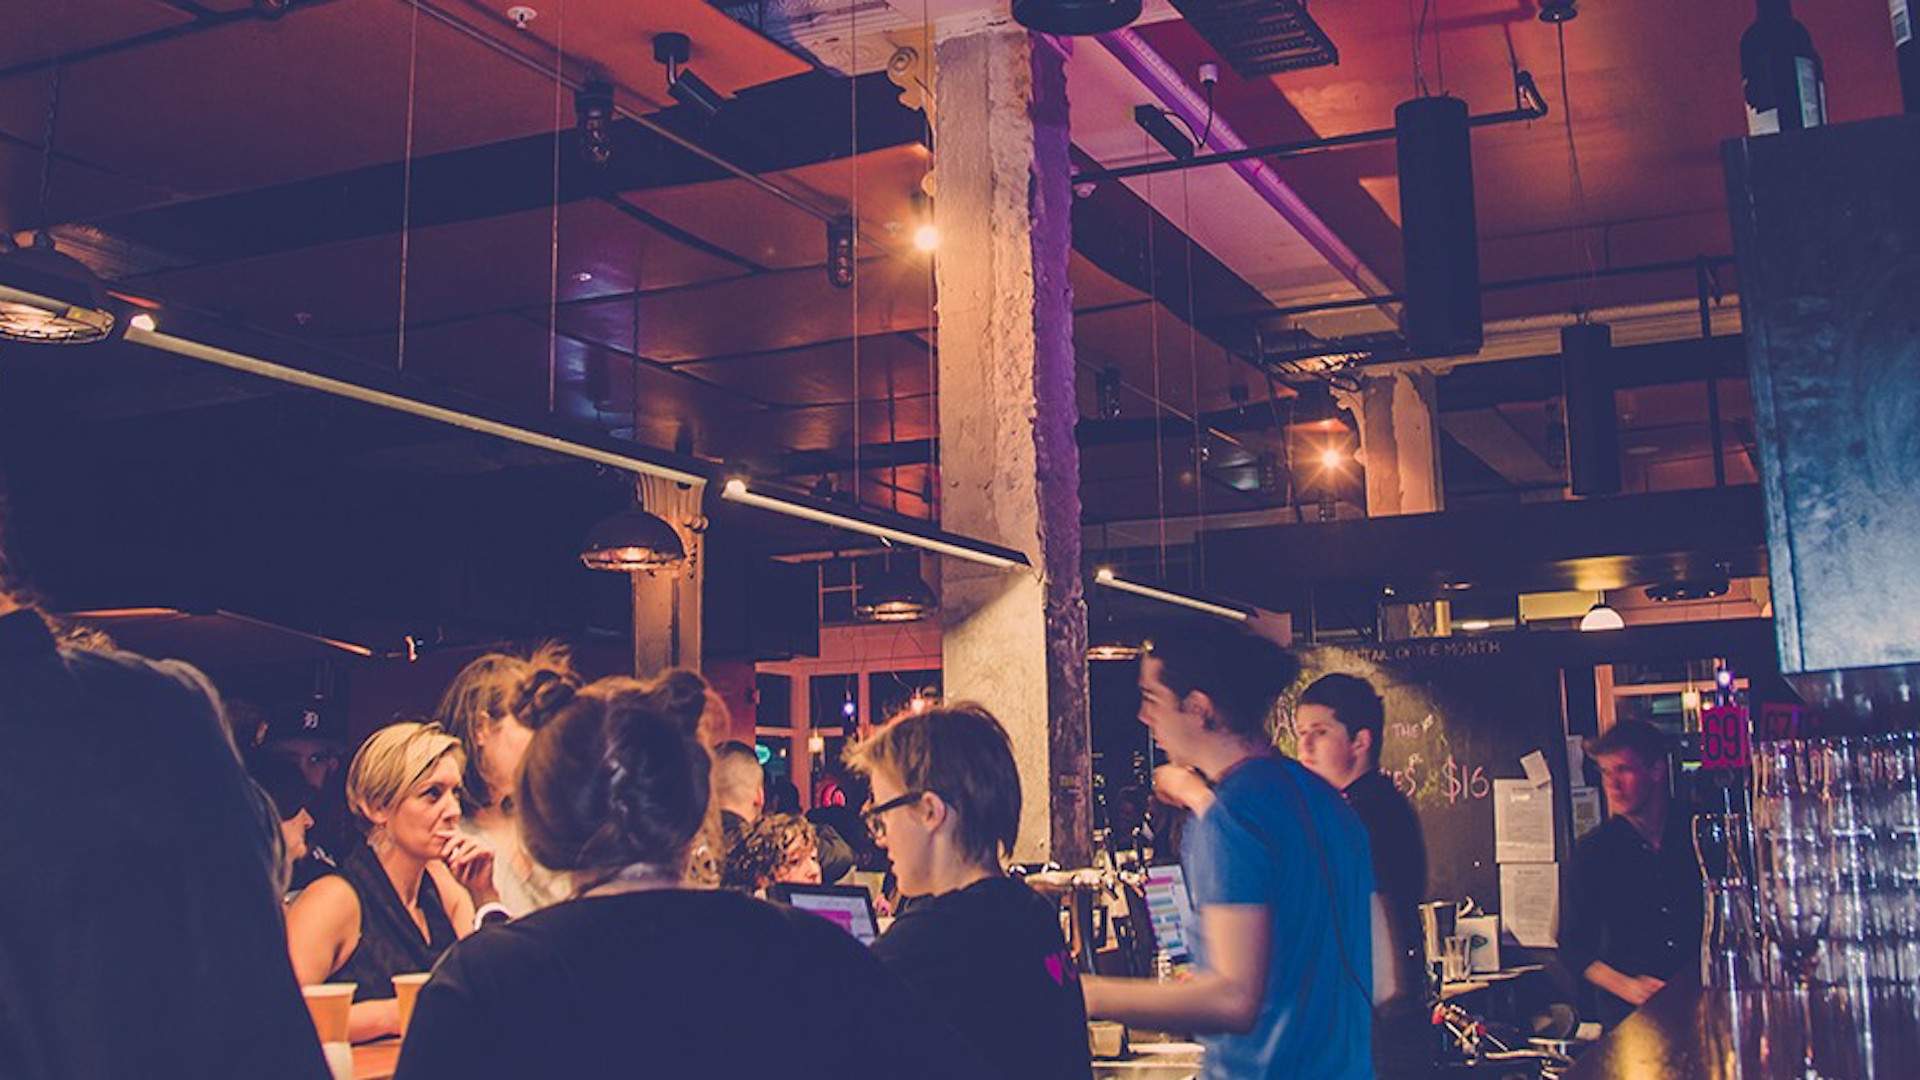 You'll Need a Password to Enter This Pop-Up Piano Bar